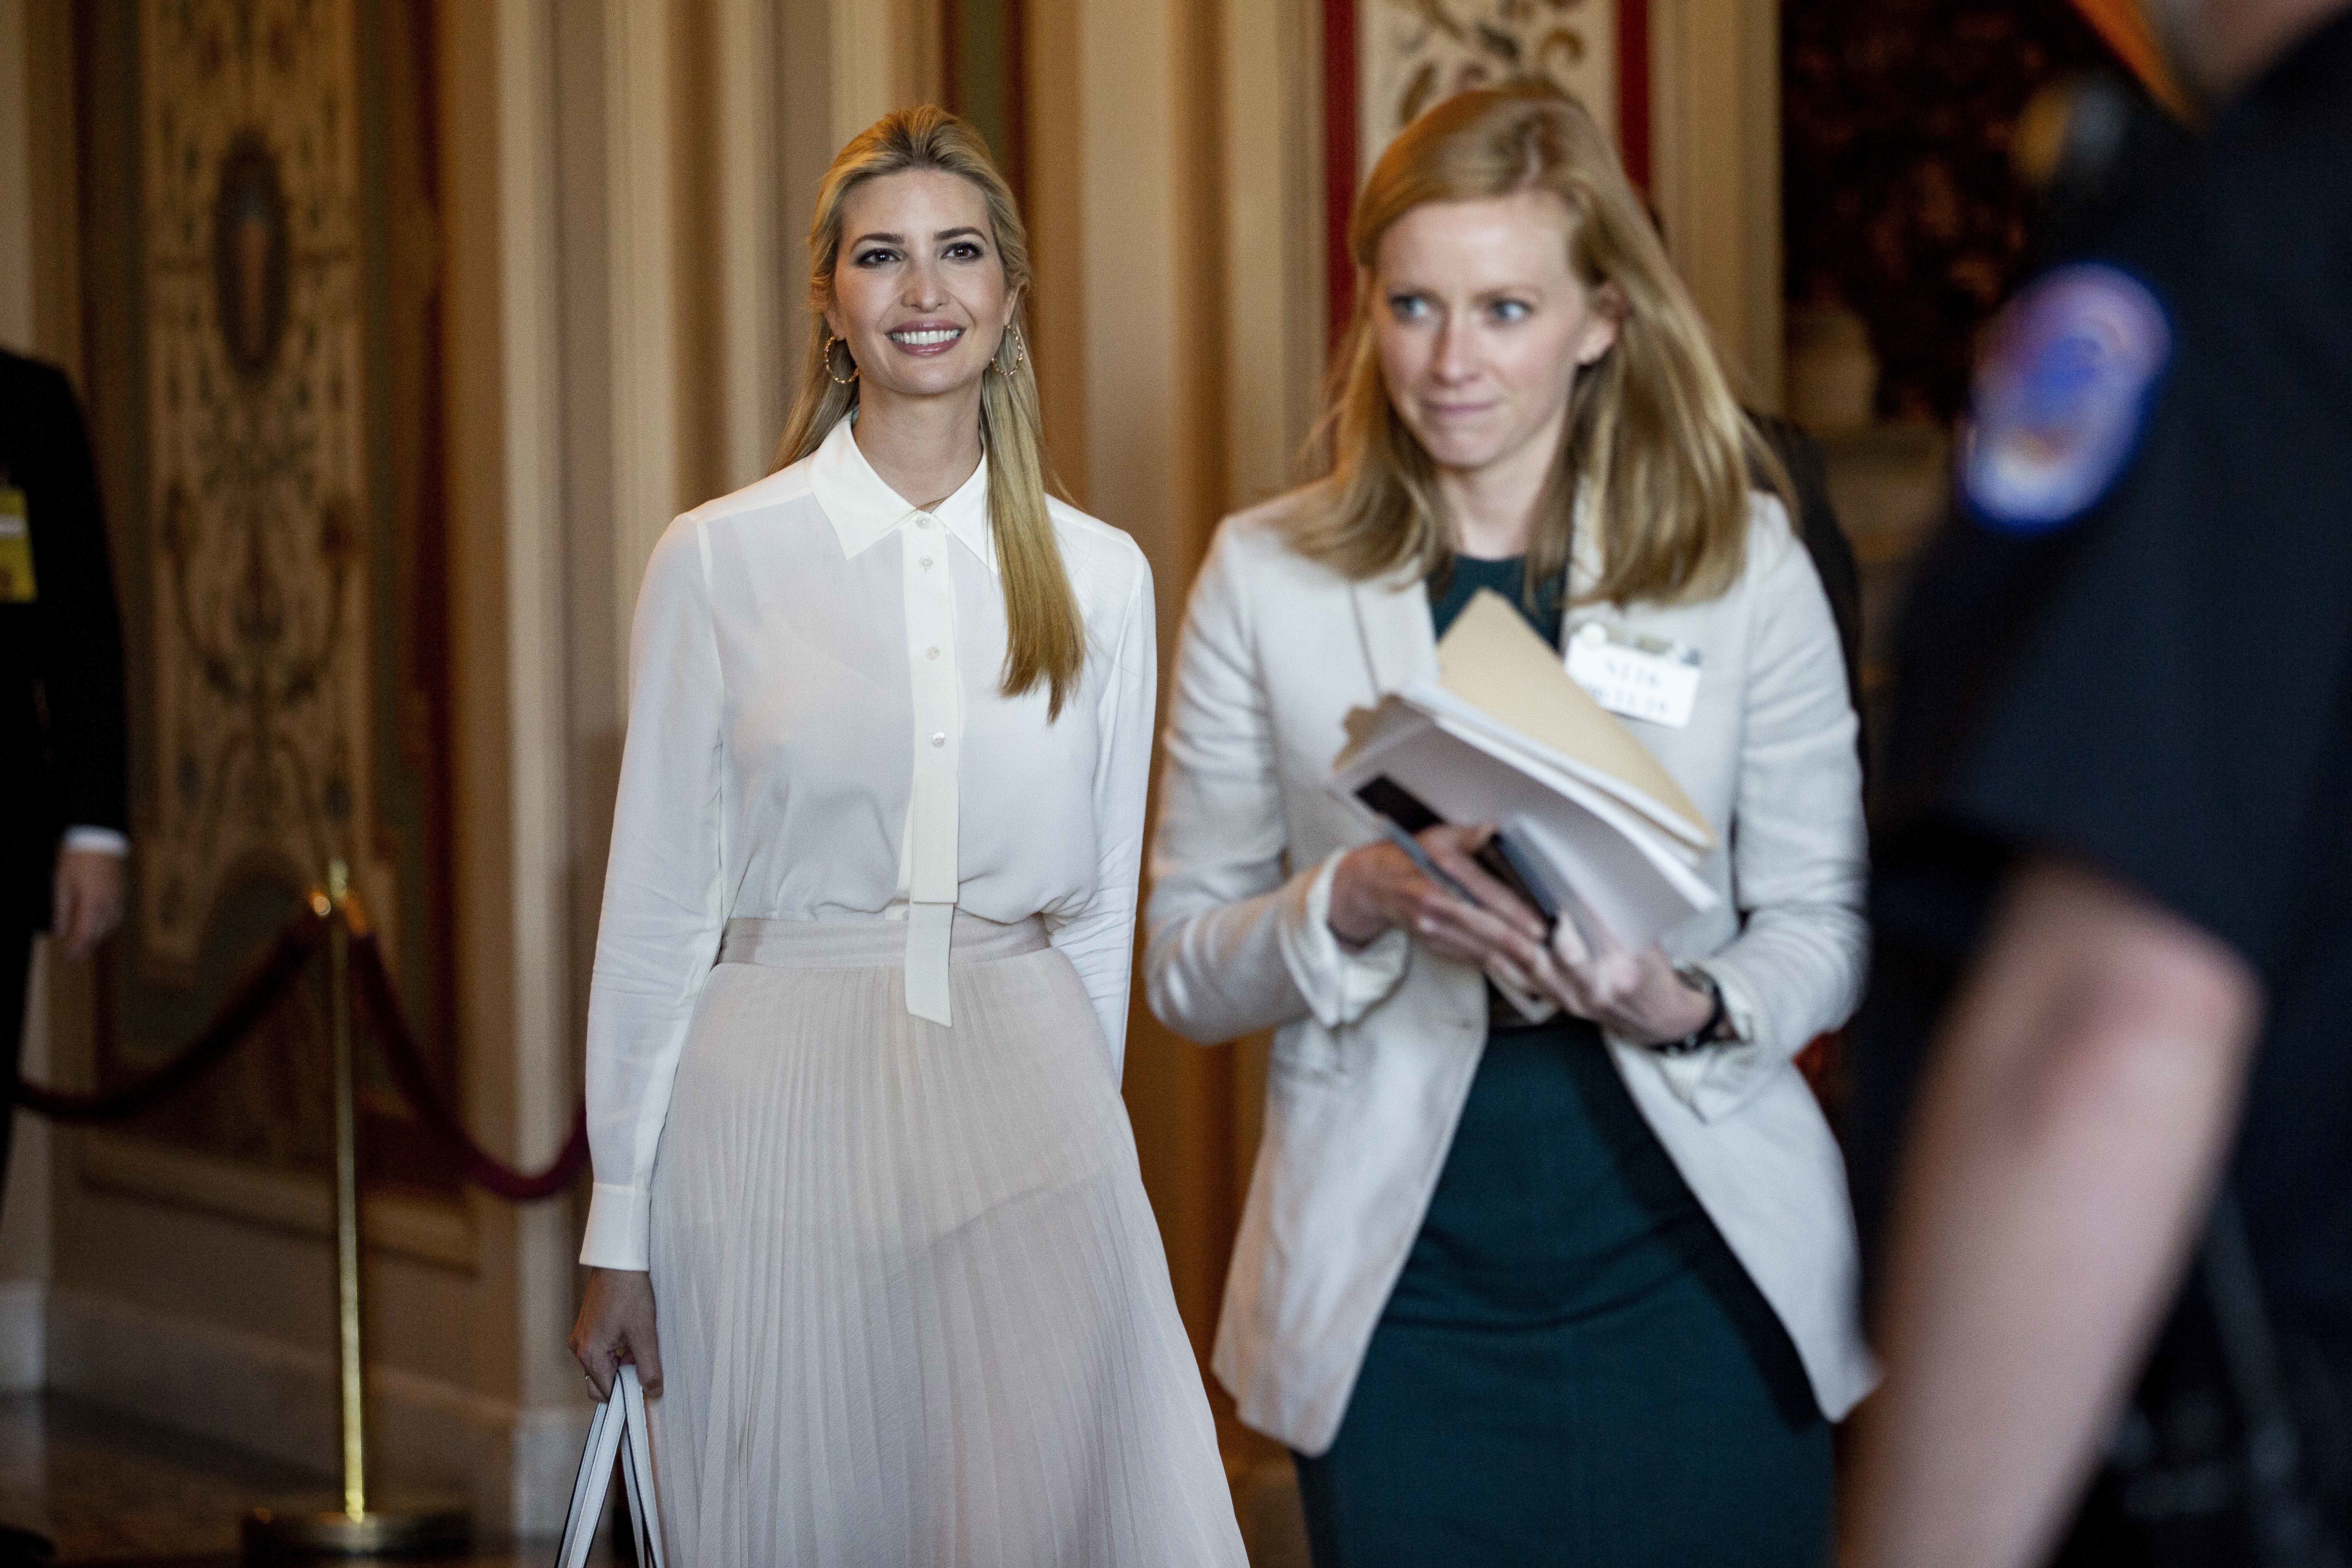 Ivanka Trump attends a meeting at the White House on June 2019 | Photo: Getty Images